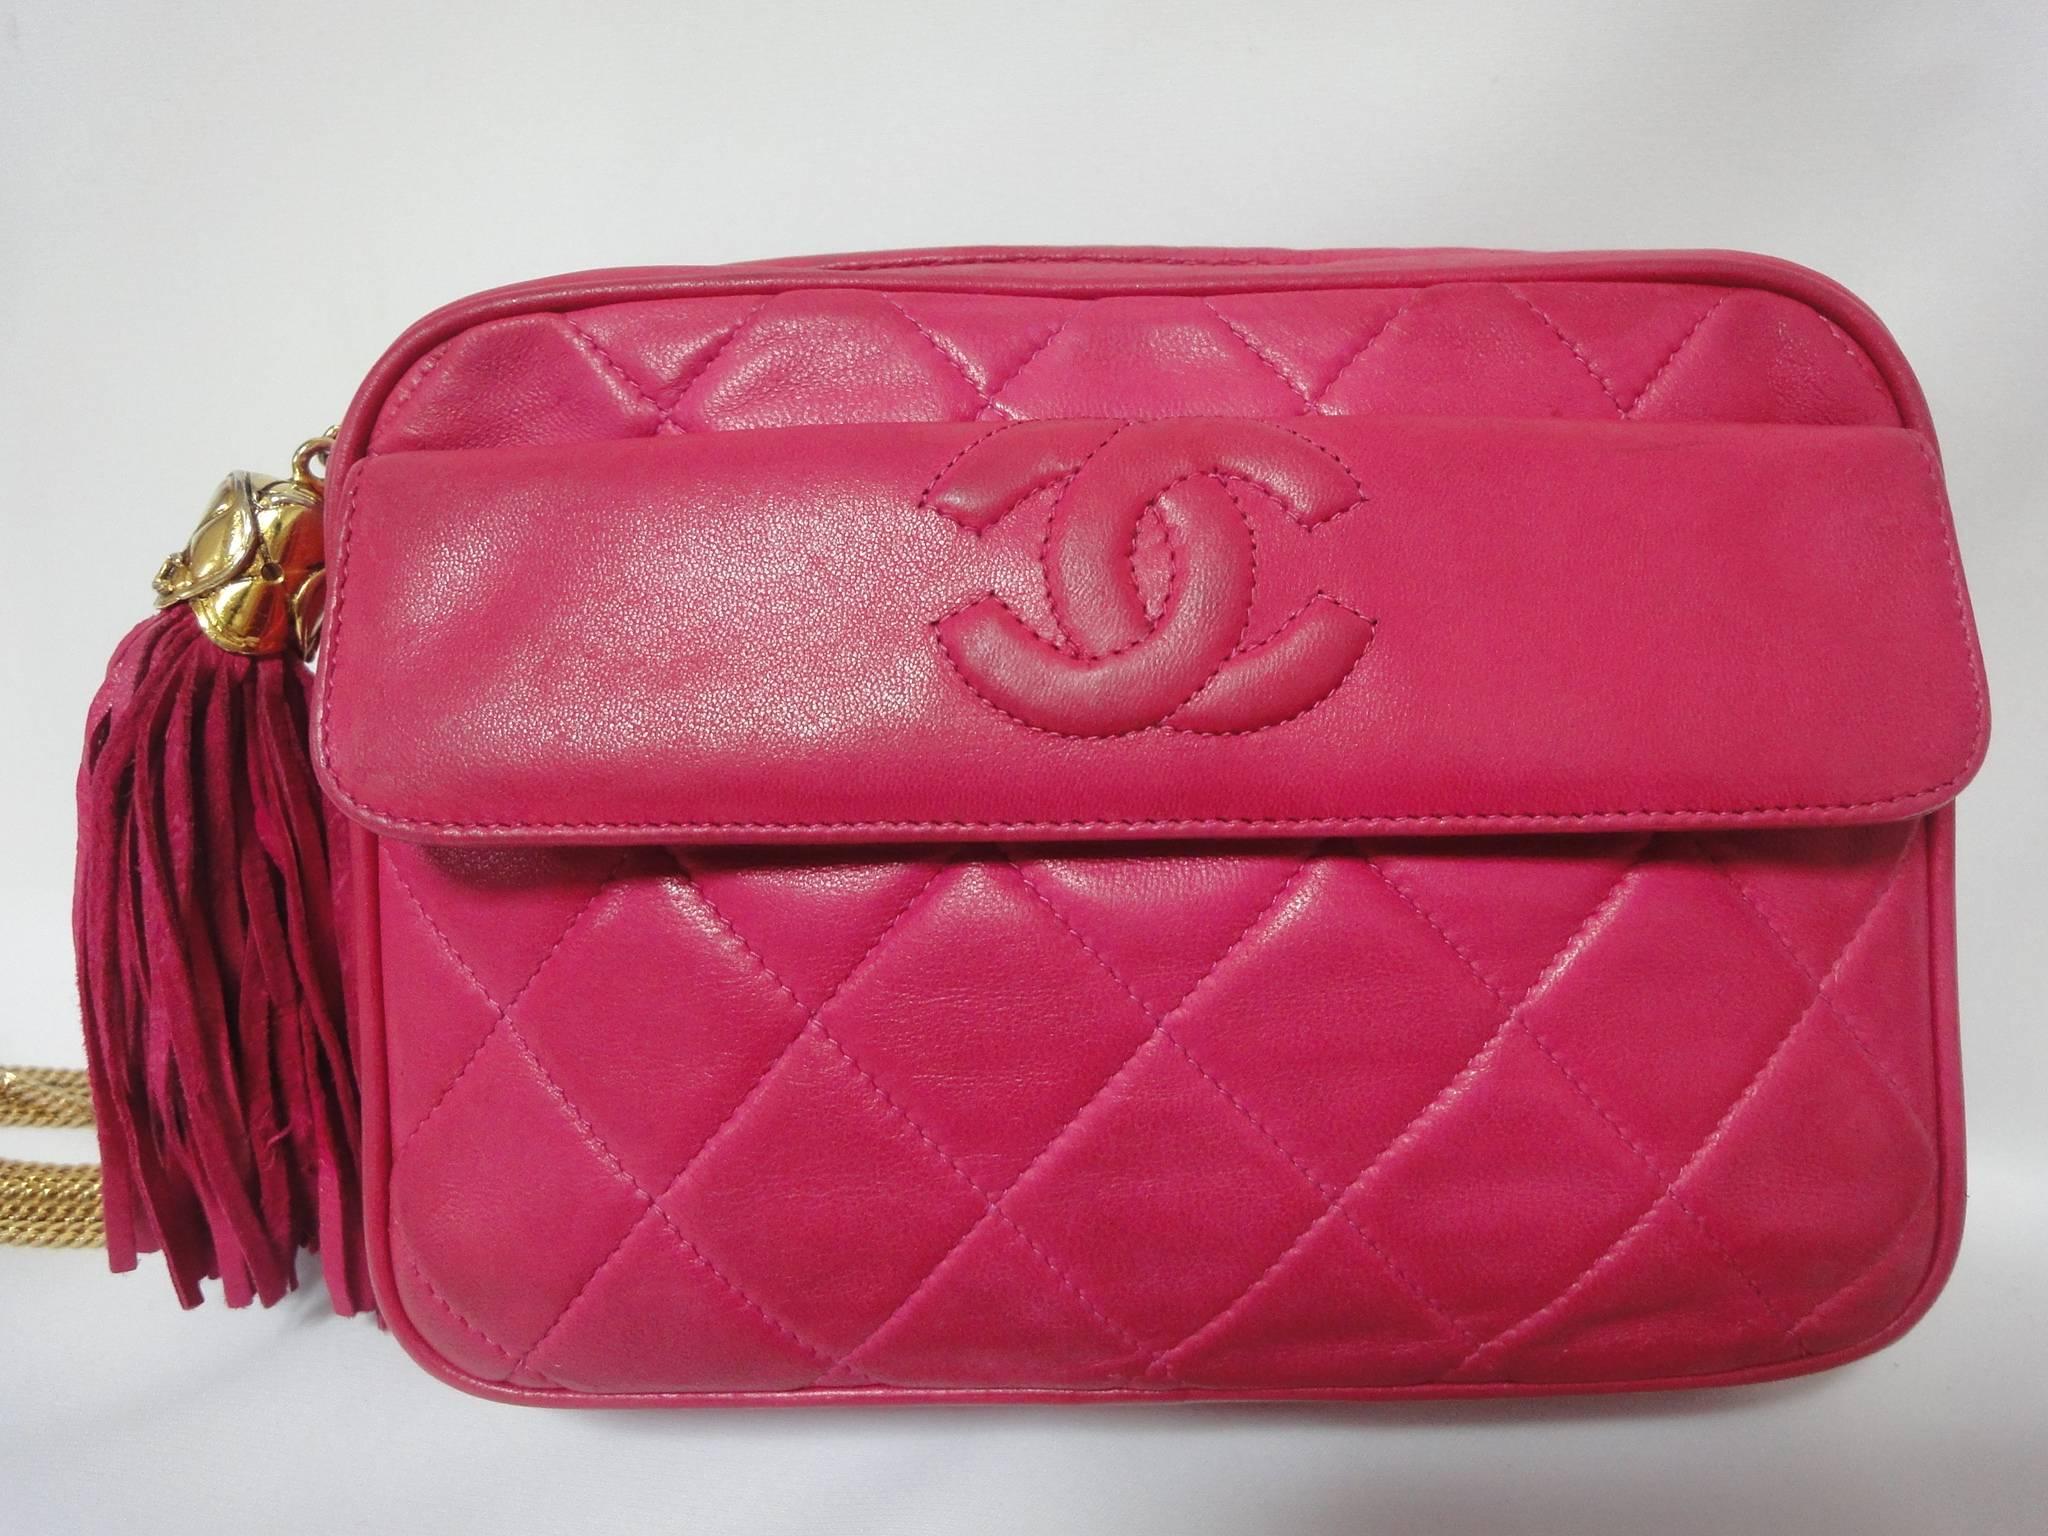 Vintage CHANEL pink lambskin camera bag style jewelry chain shoulder purse with a tassel and CC mark. Rare masterpiece.

Introducing one-of-a-kind, rare vintage purse from CHANEL back in the early 90's.
Vintage lambskin pink camera bag style